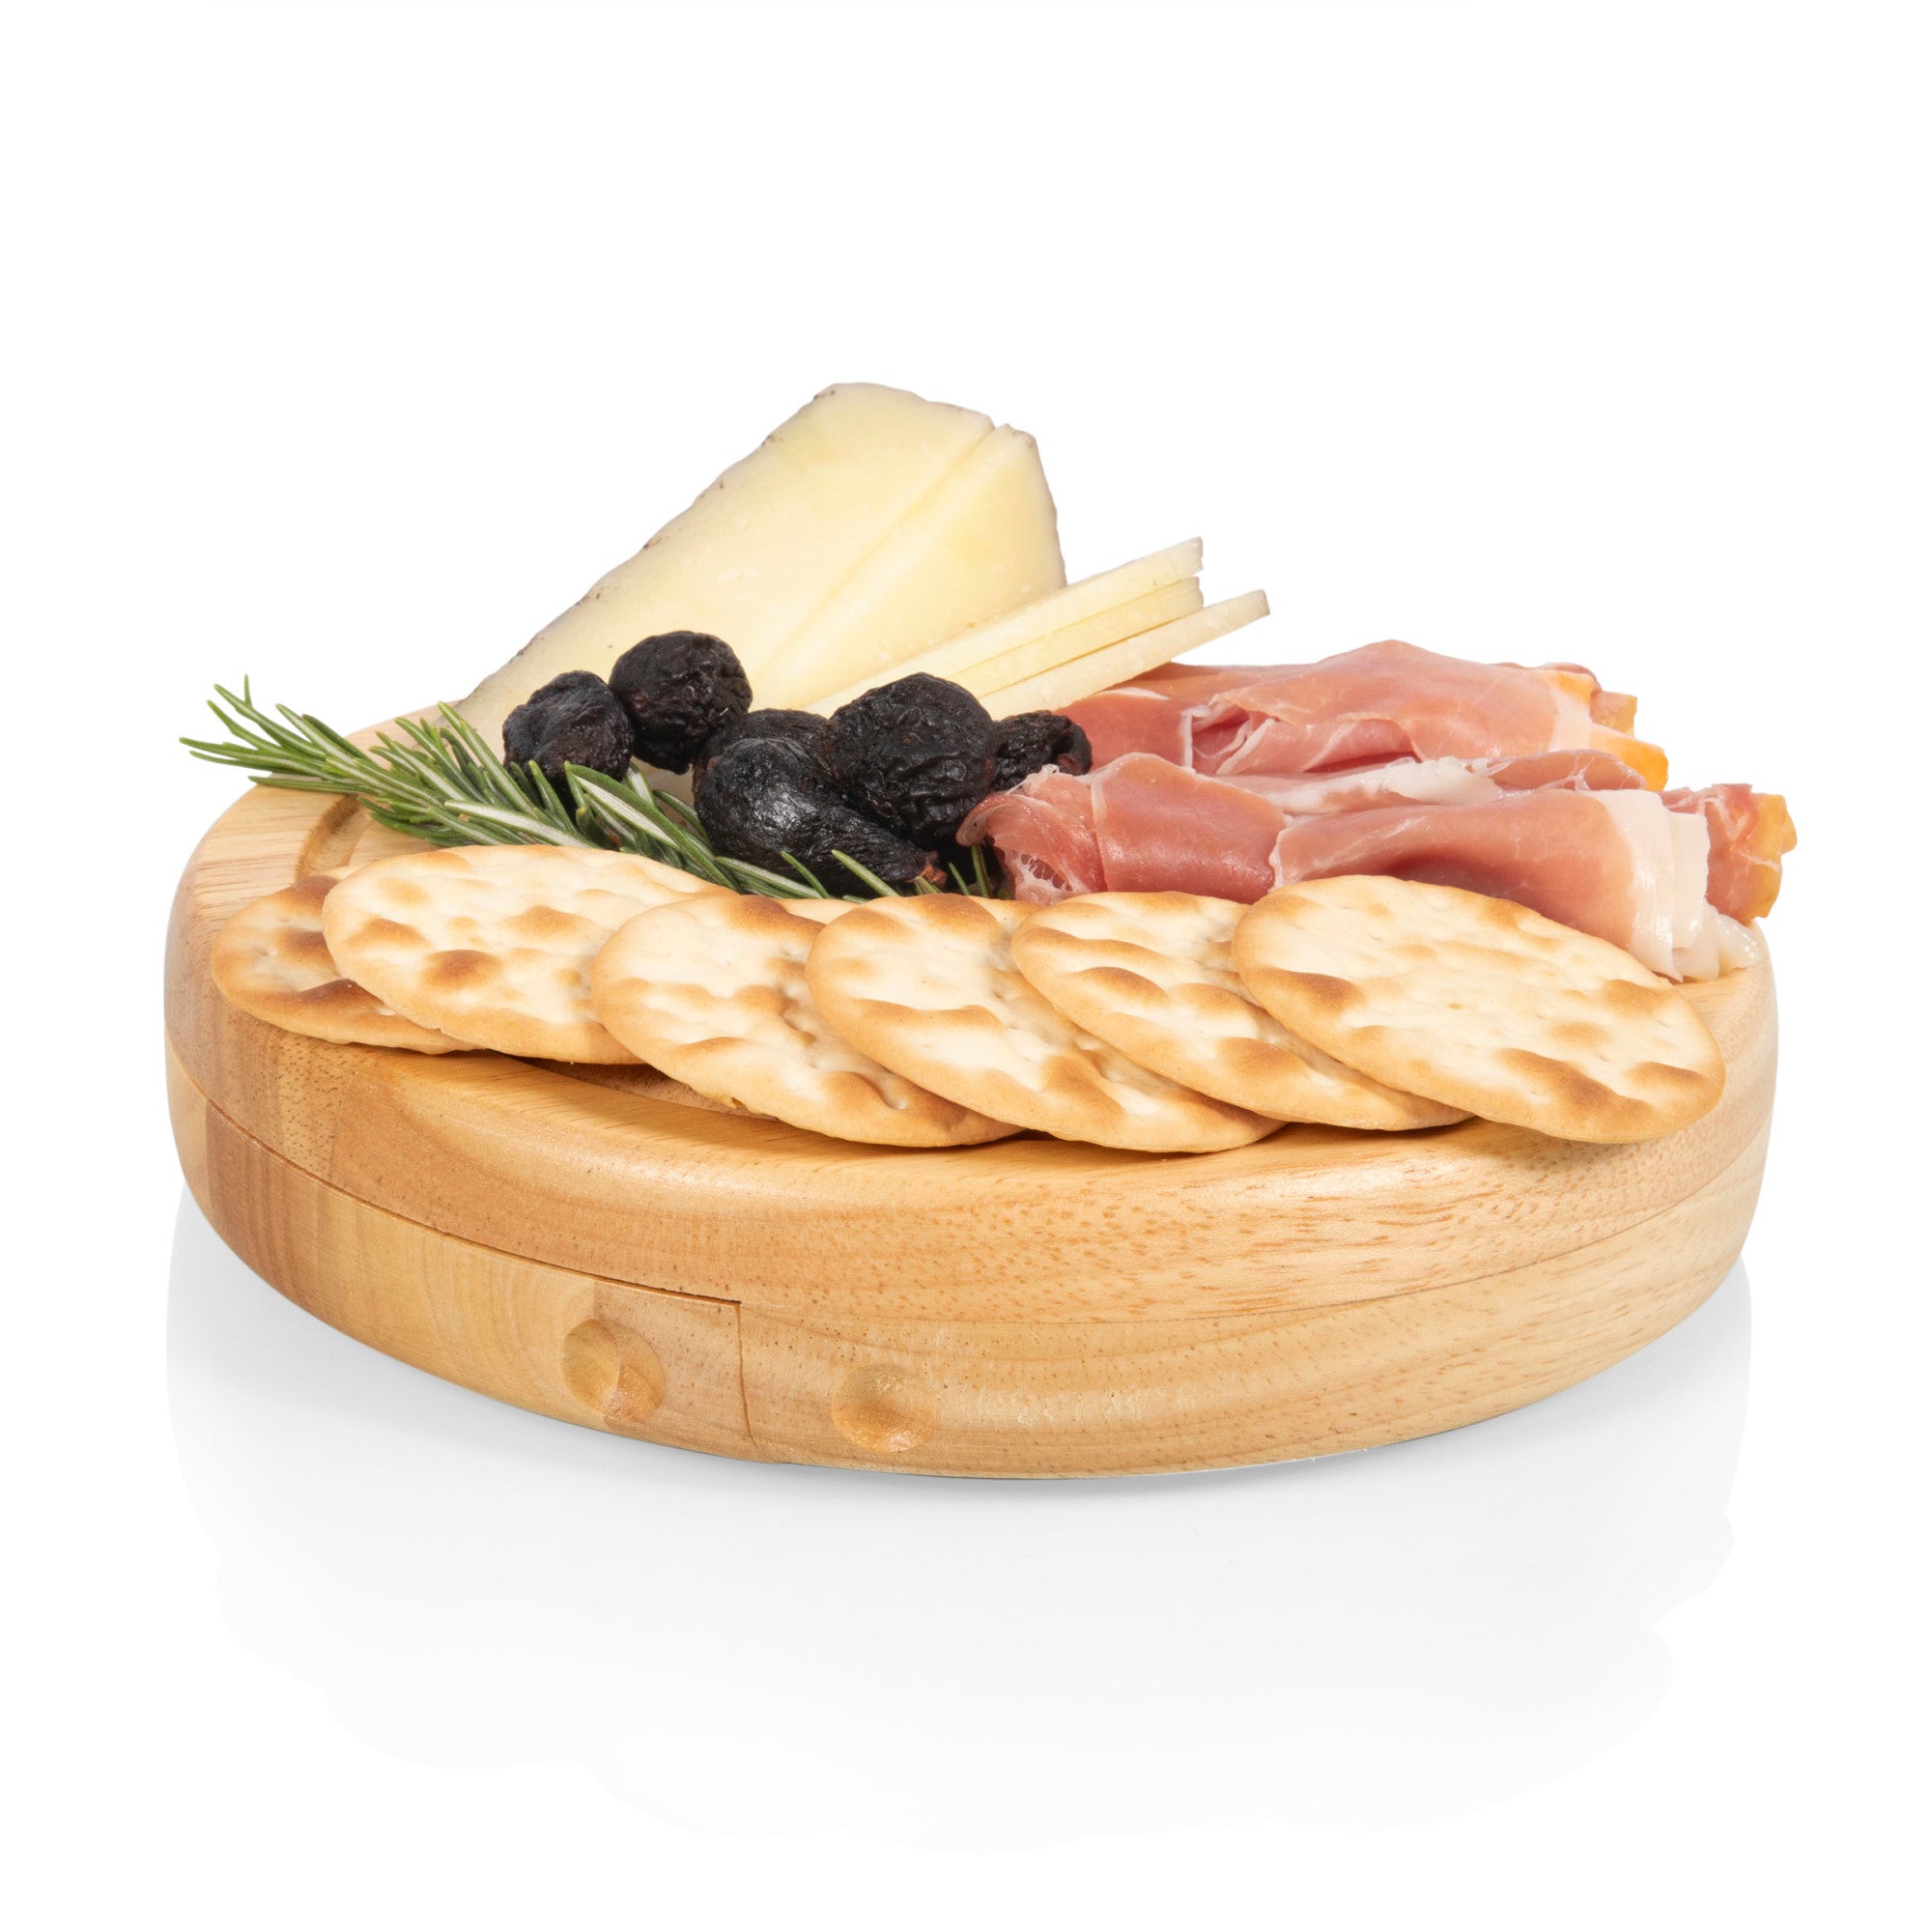 Chicago White Sox - Brie Cheese Cutting Board & Tools Set